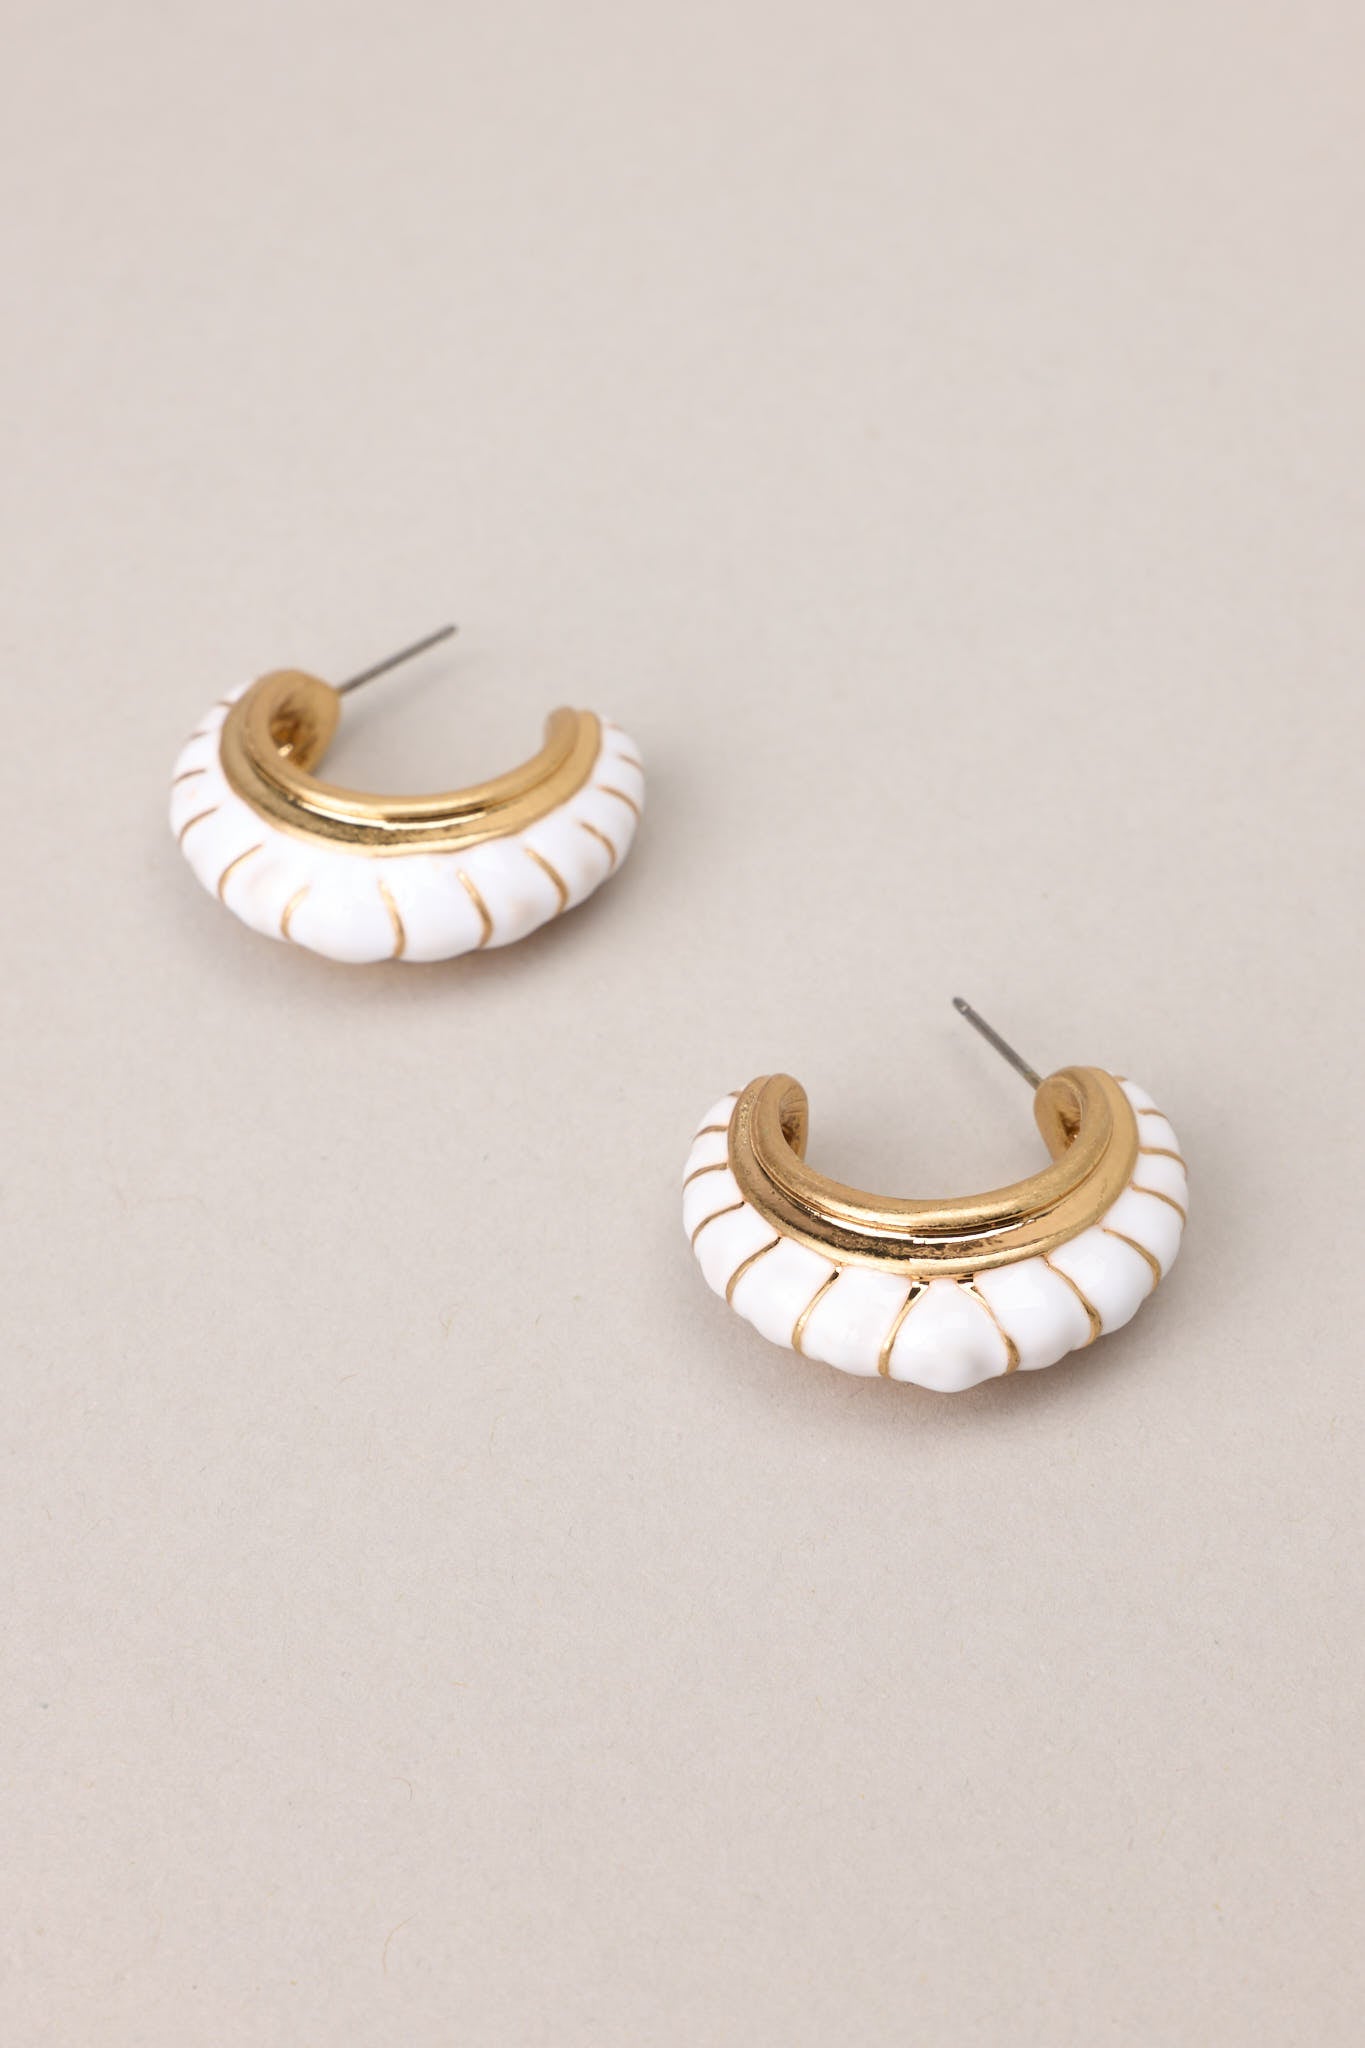 Angled overview of these gold earrings with white detailing, secure post backings.